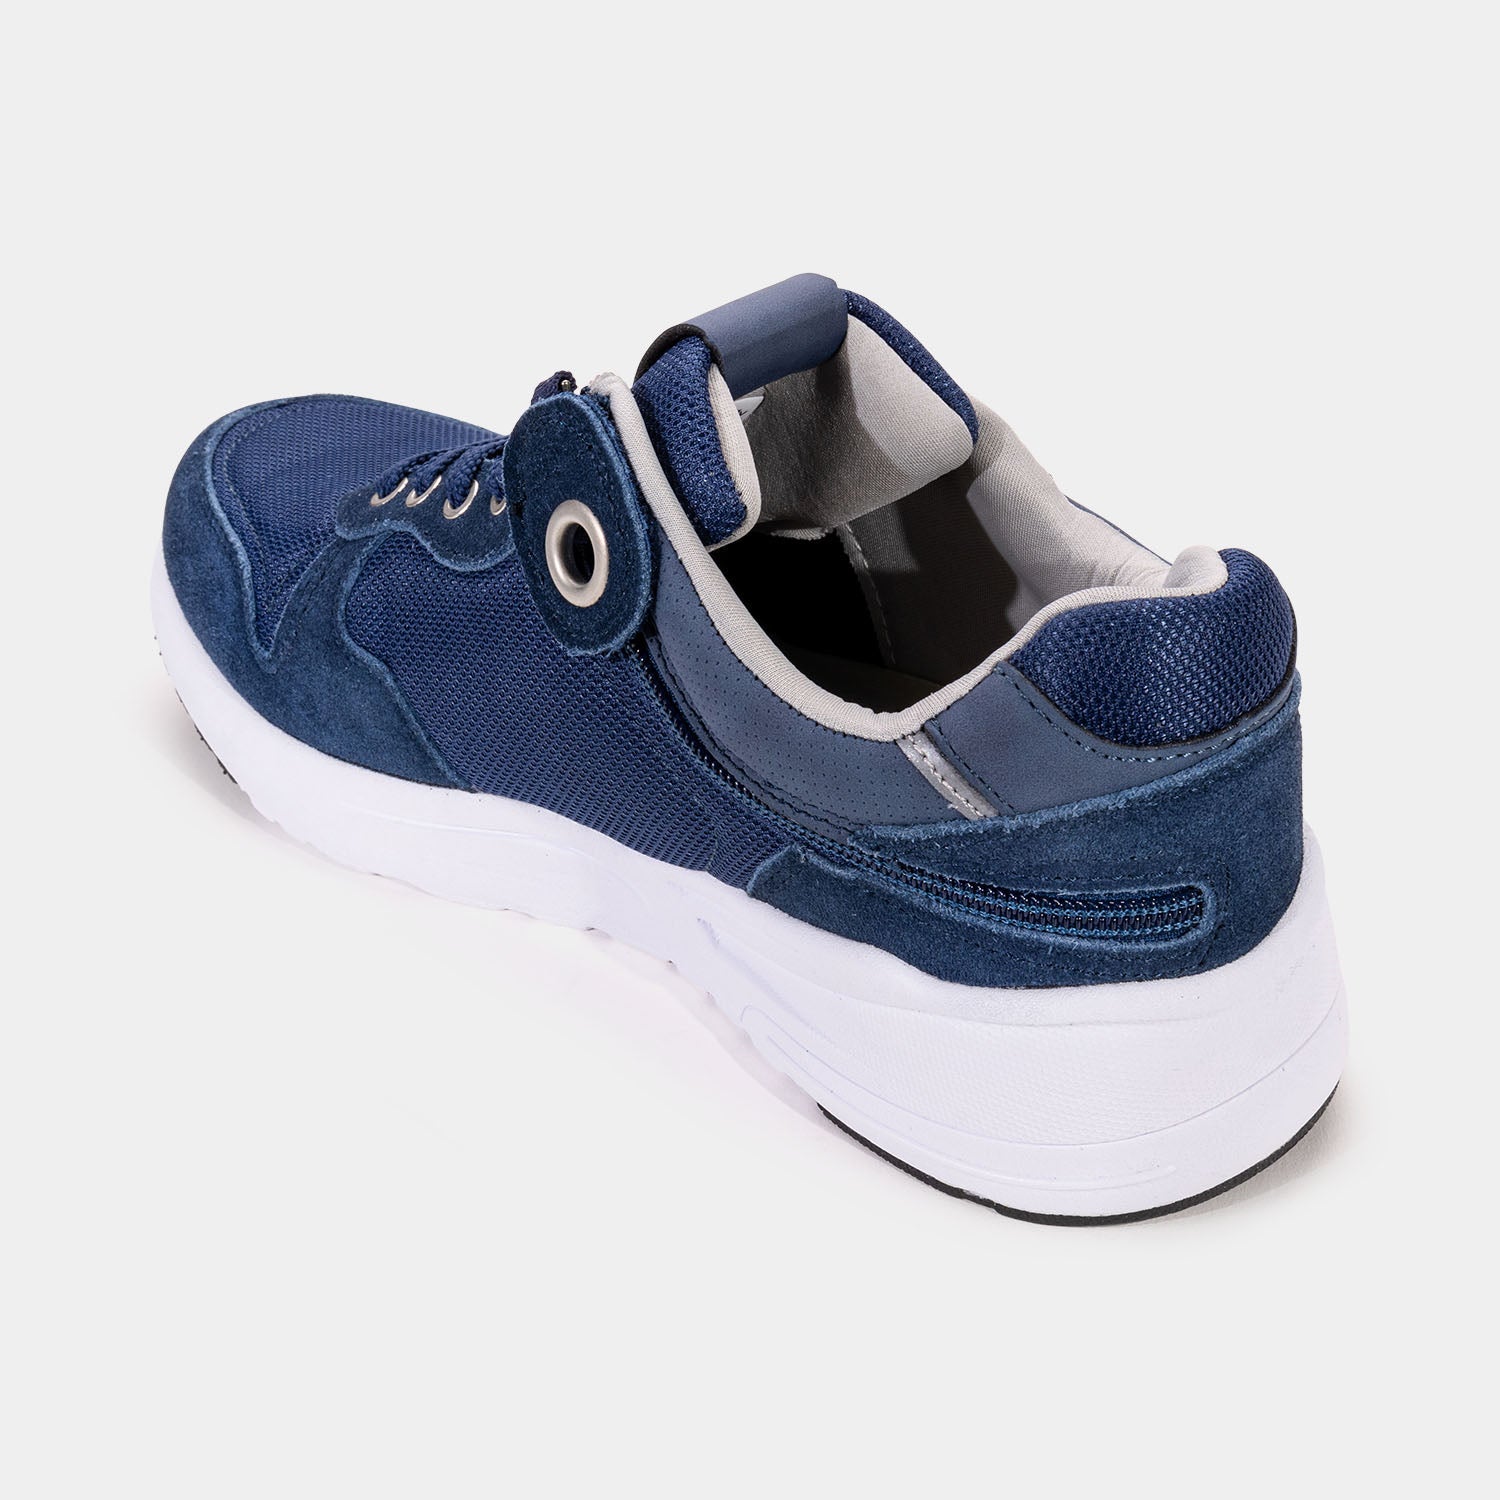 Navy blue mens shoe with white bottom, light blue accents, and rear zipper access.